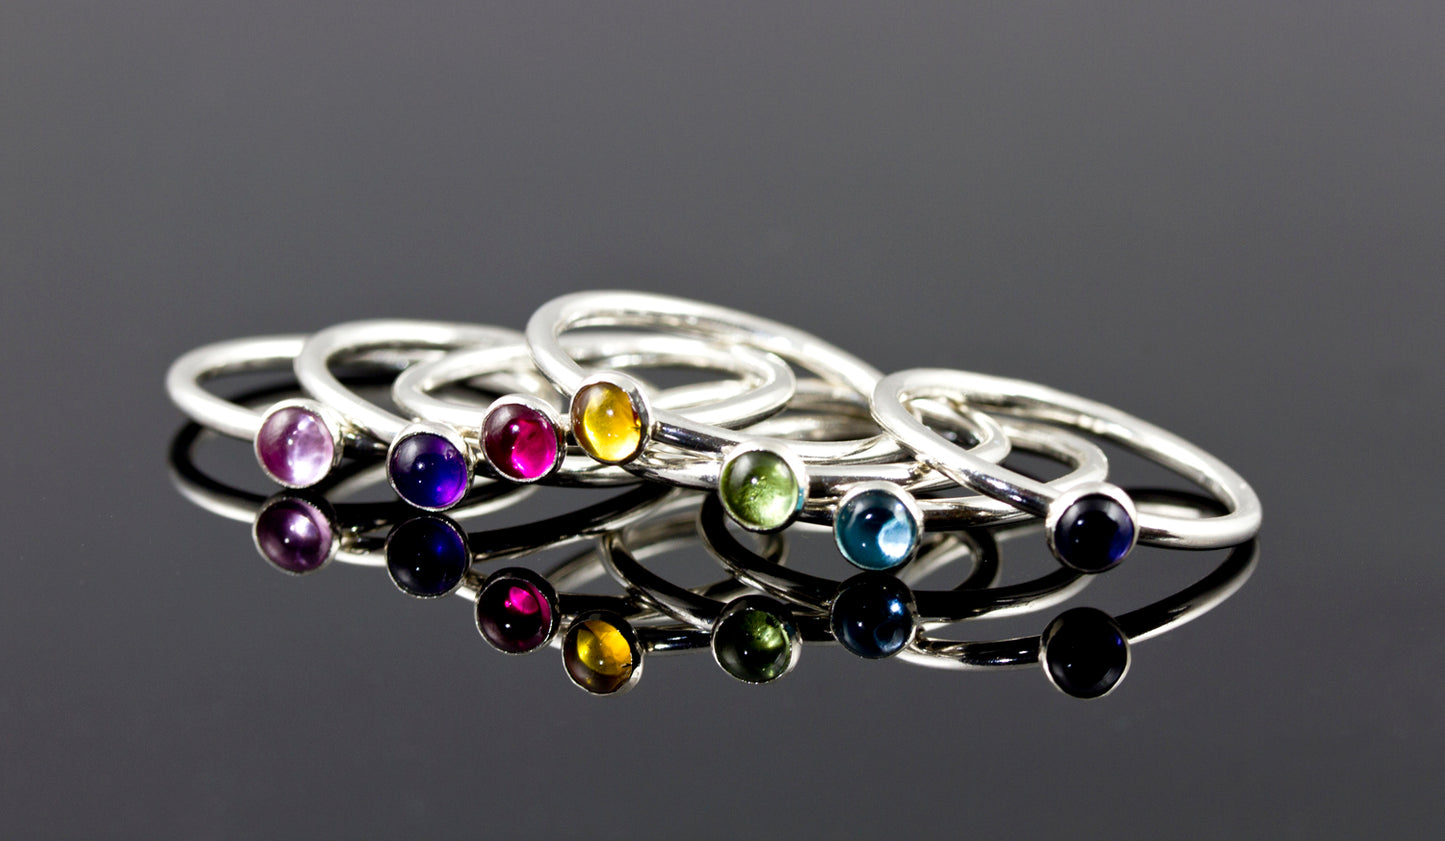 Birthstone gemstone stacking rings in sustainable sterling silver.  Handmade in New Jersey, US.